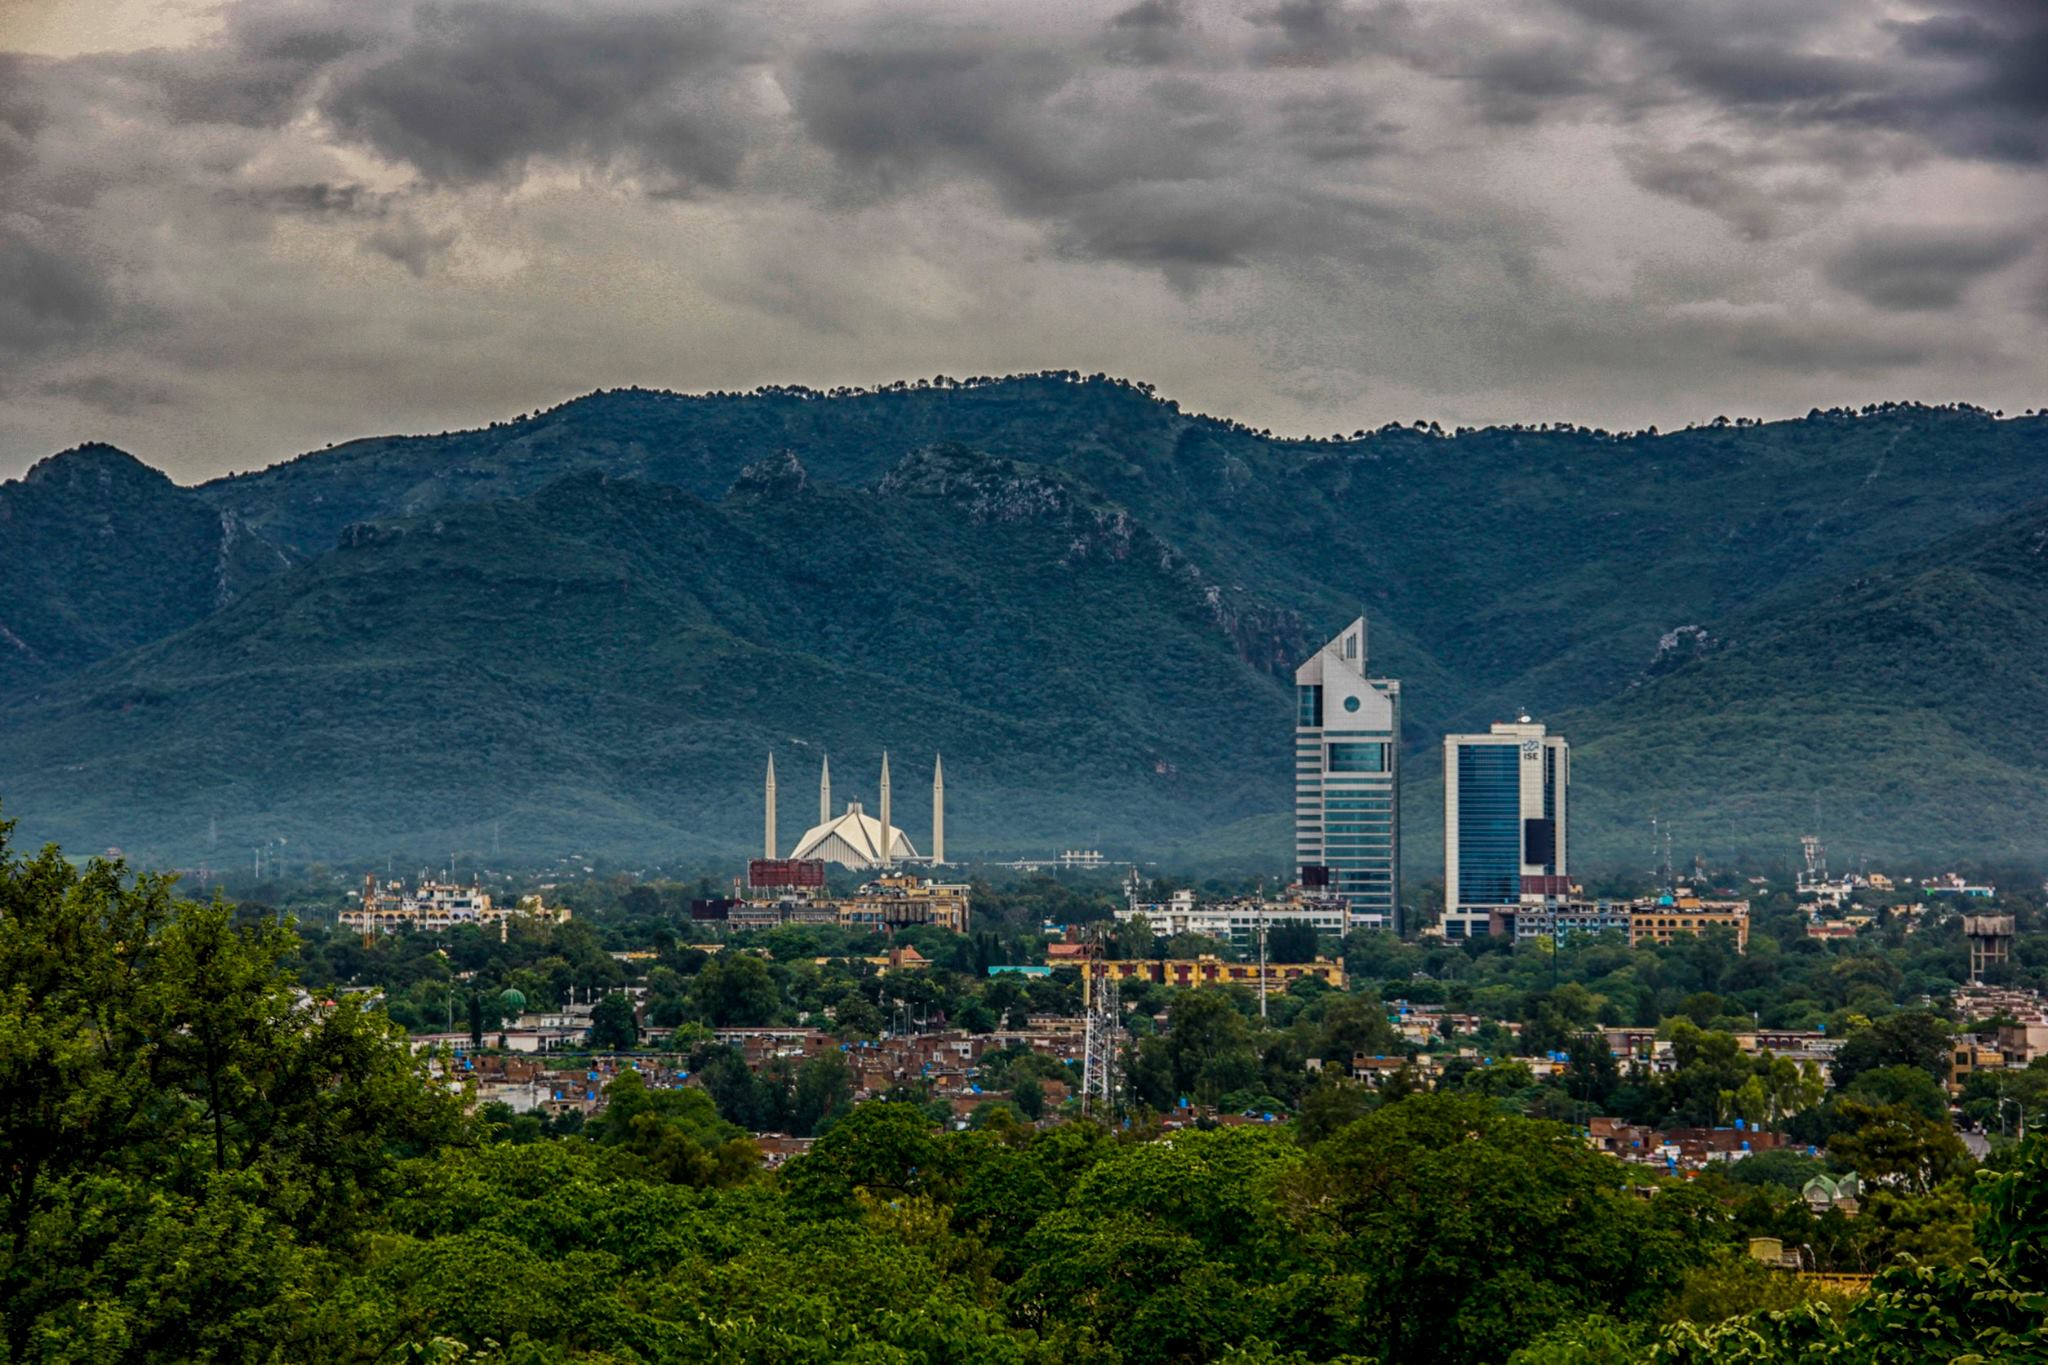 visit places in islamabad